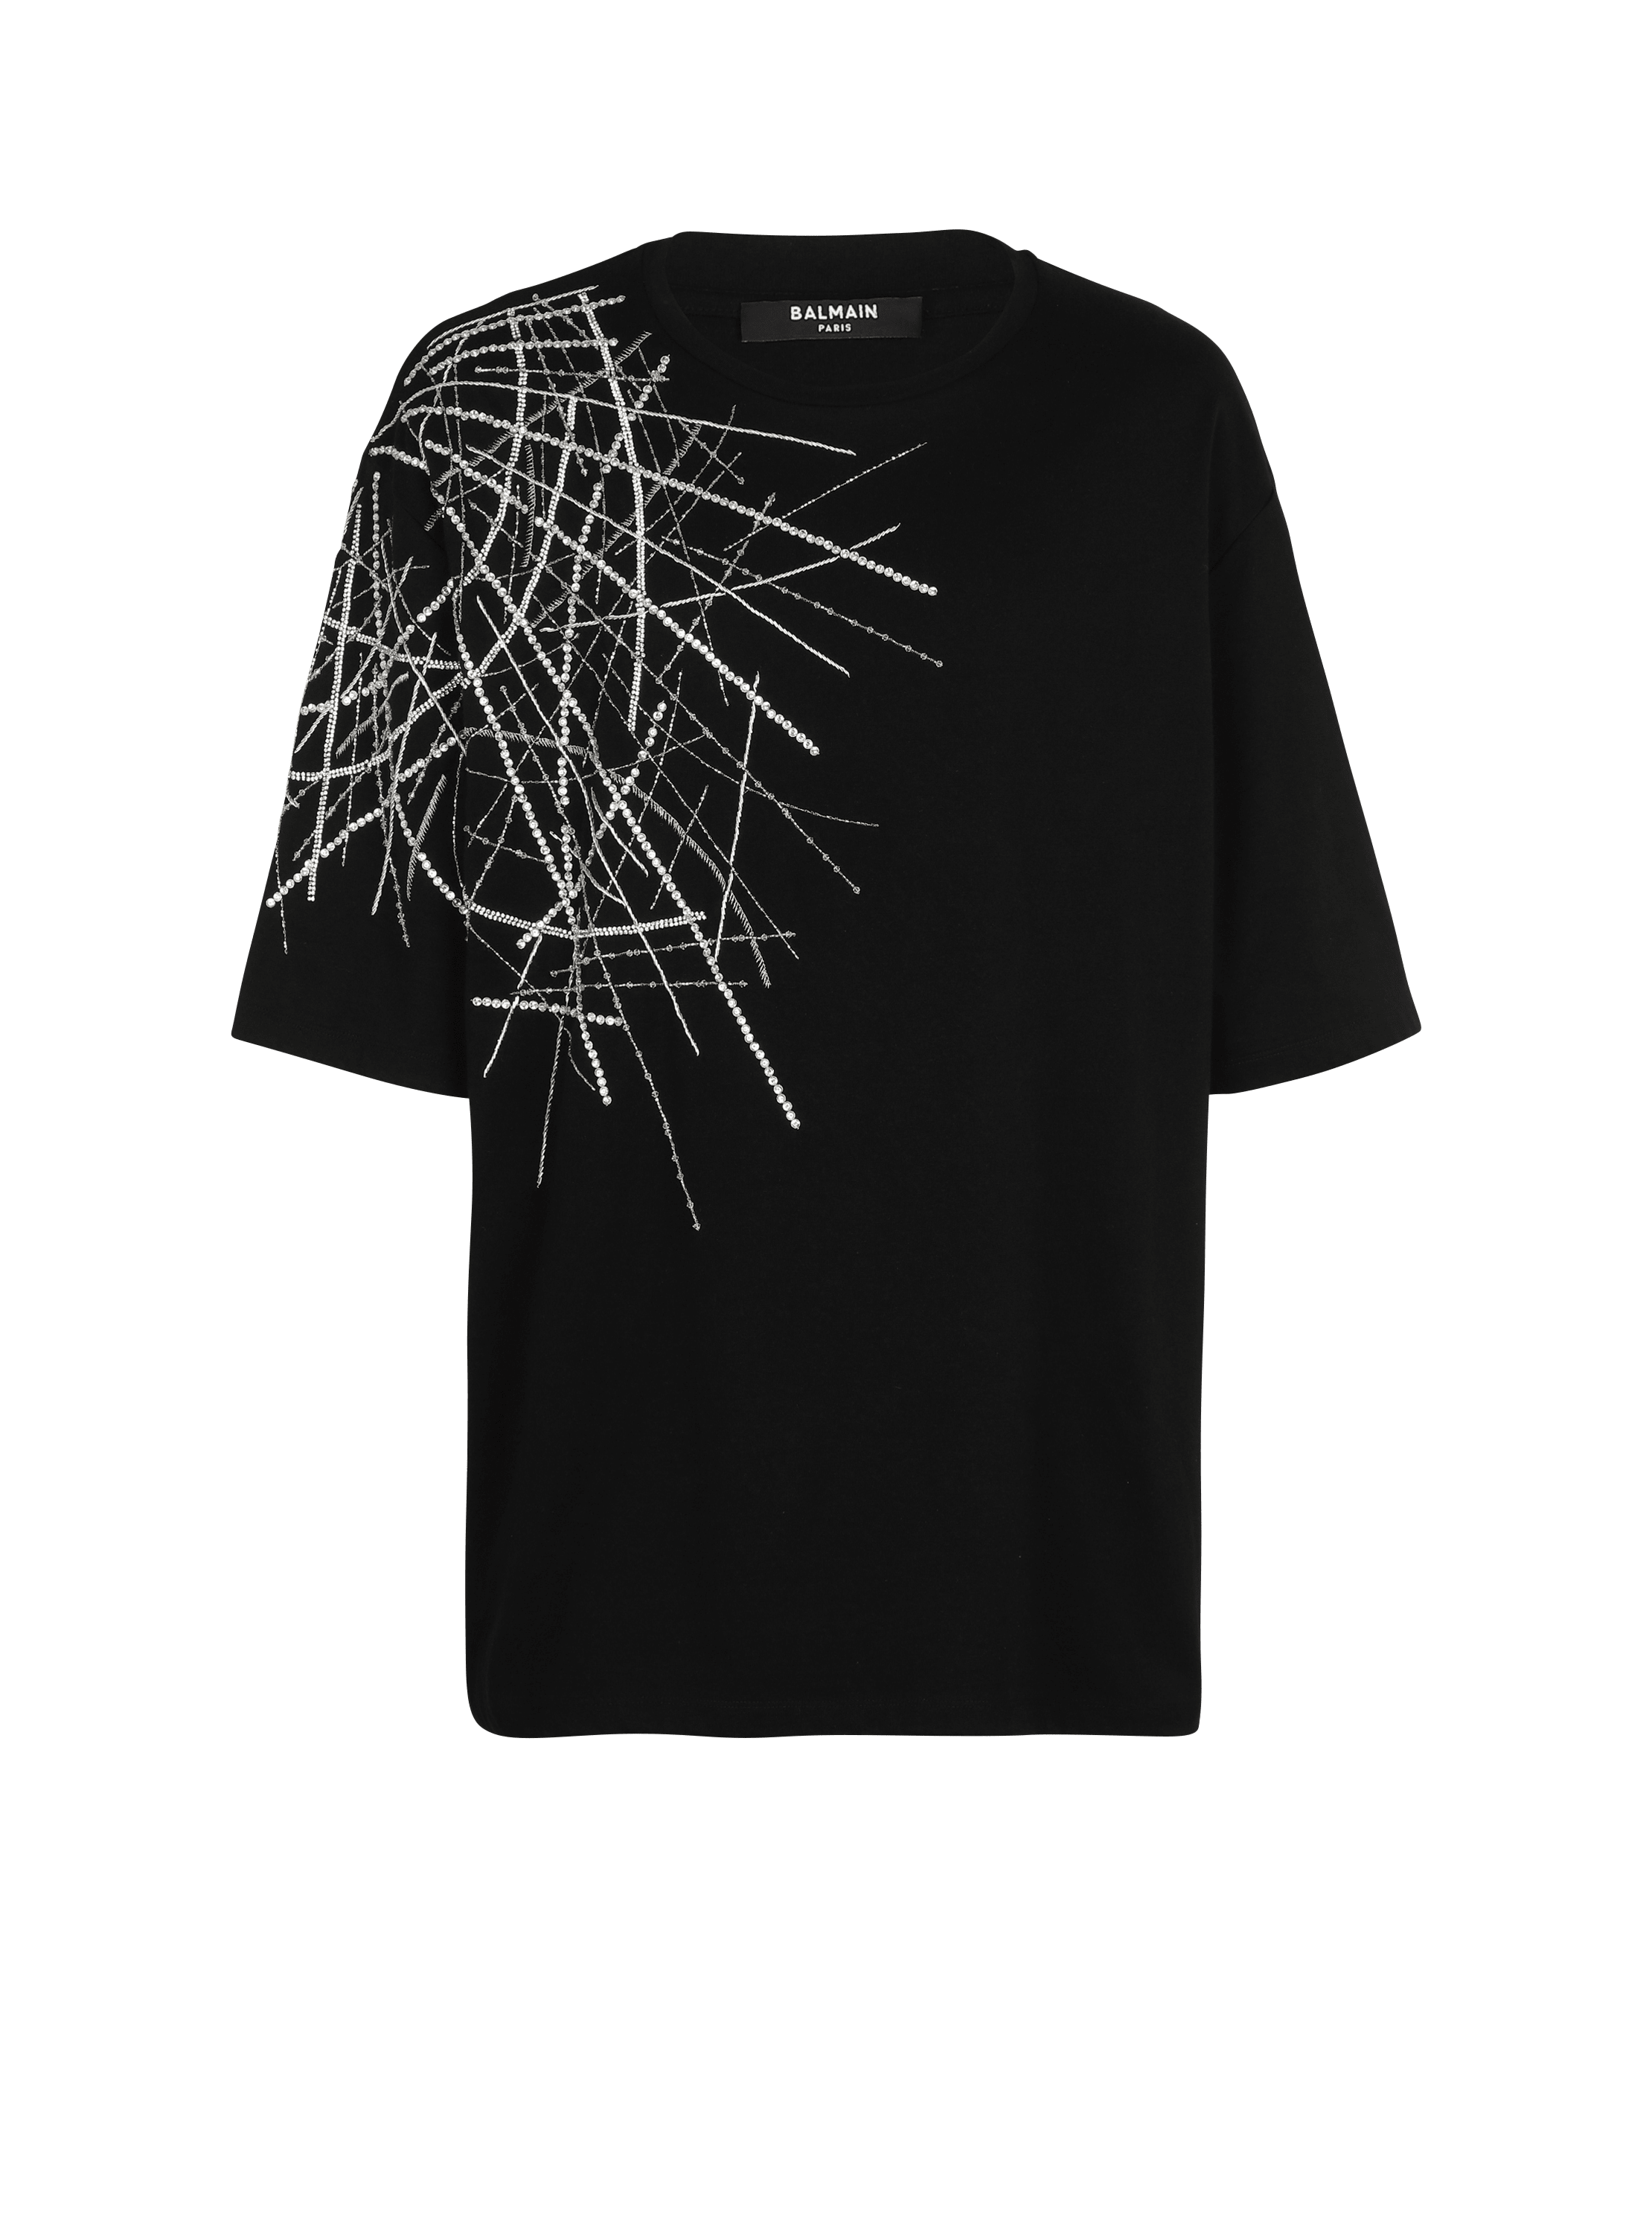 Oversized Embroidered jersey T-shirt, black, hi-res